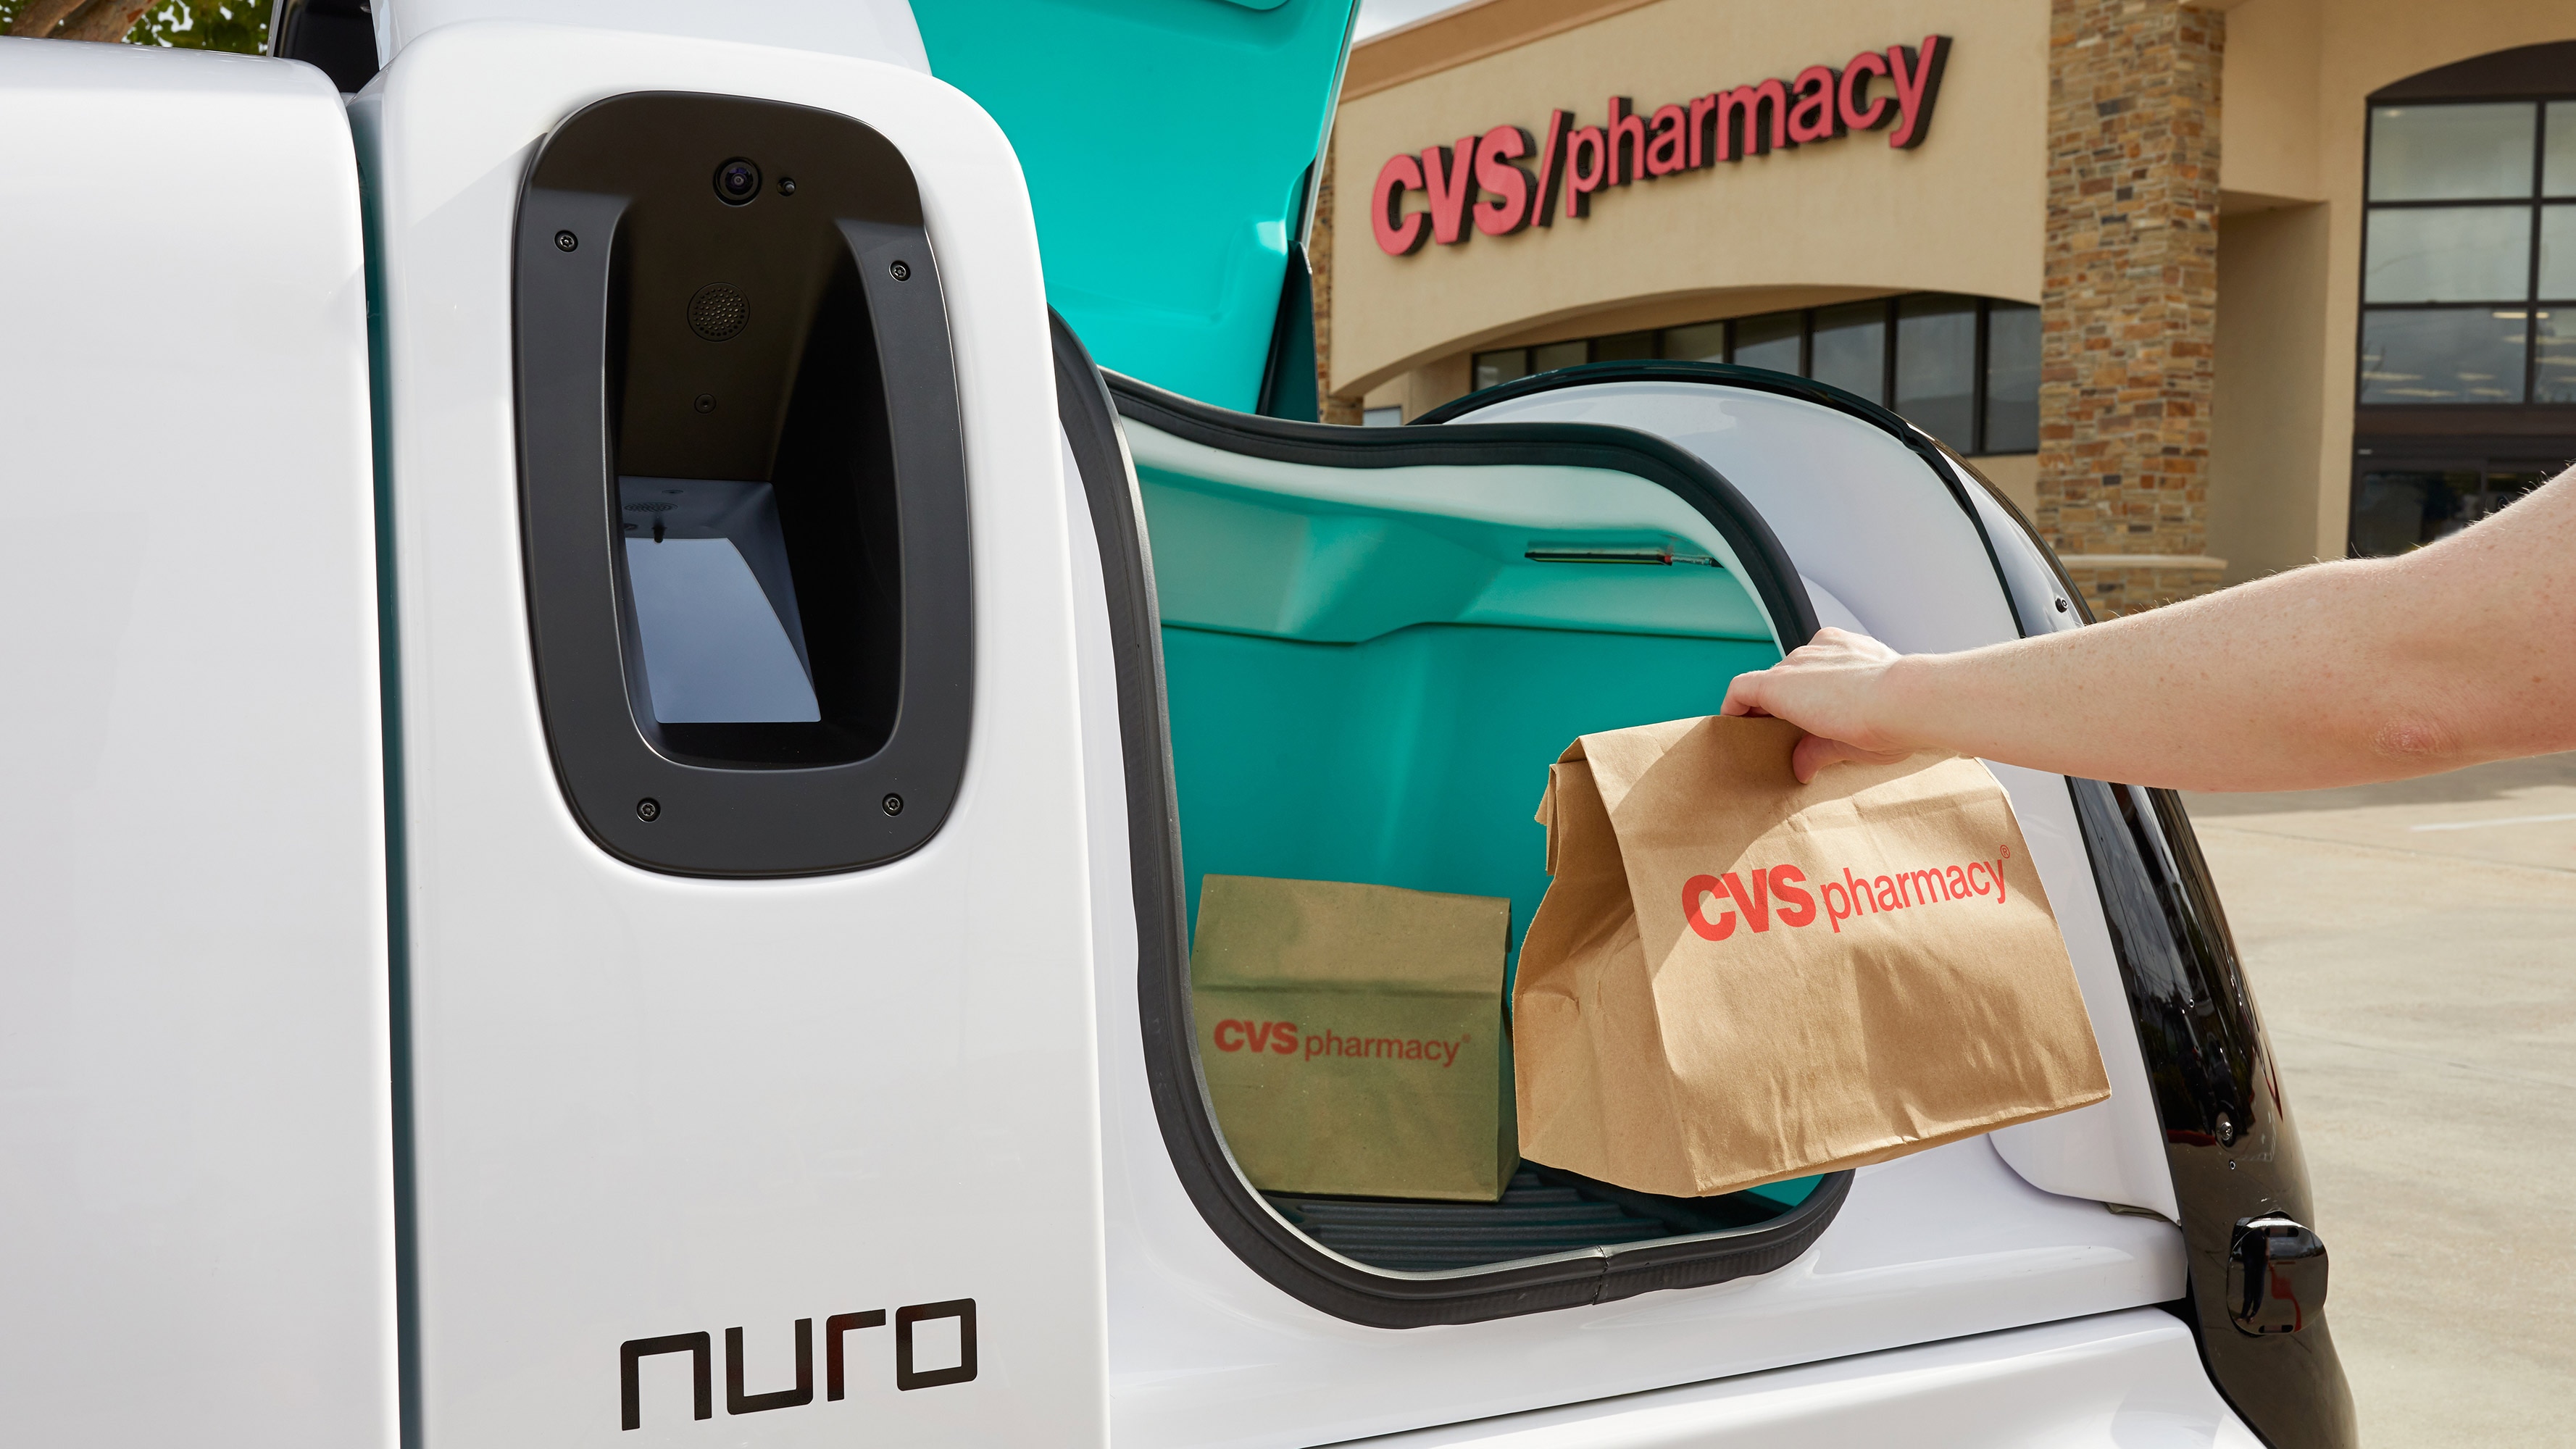 A CVS Pharmacy customer collects a delivery from a Nuro autonomous vehicle outside of a CVS Pharmacy location in Texas.